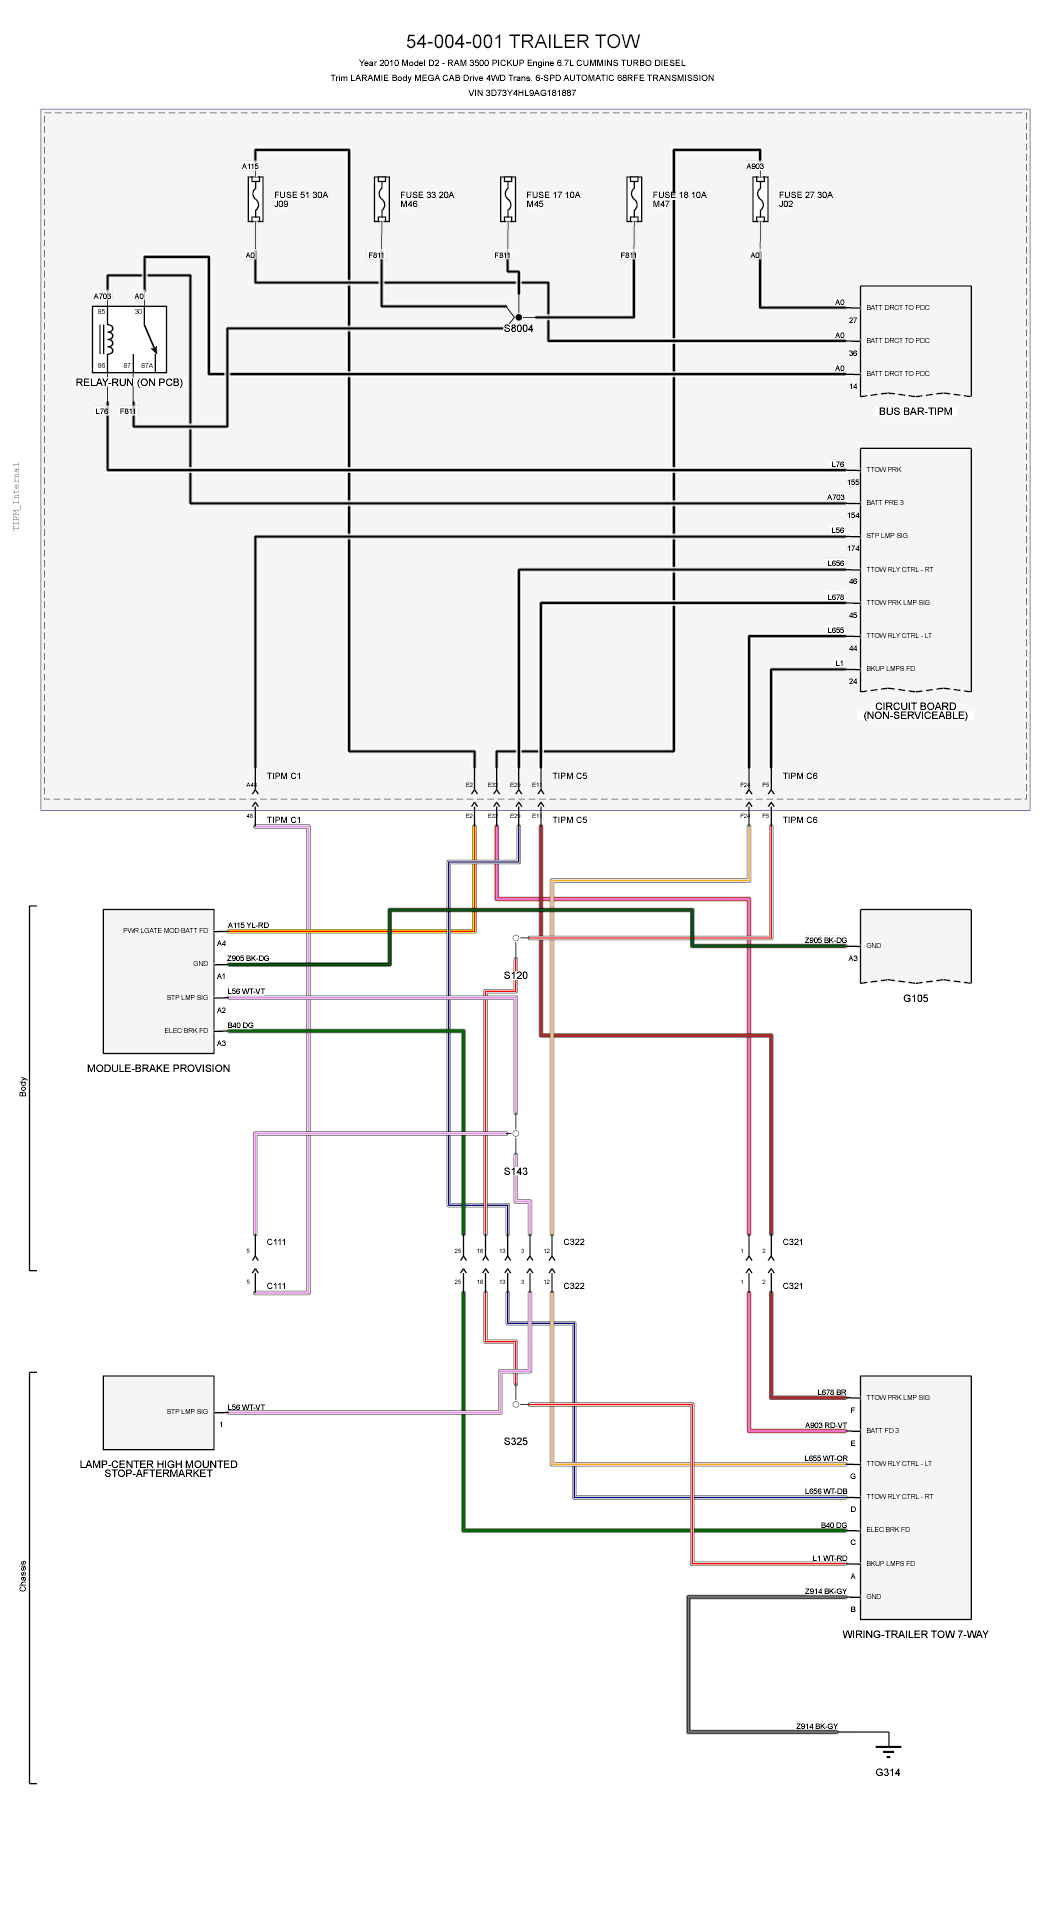 2010 dodge ram 1500 wiring diagram collection